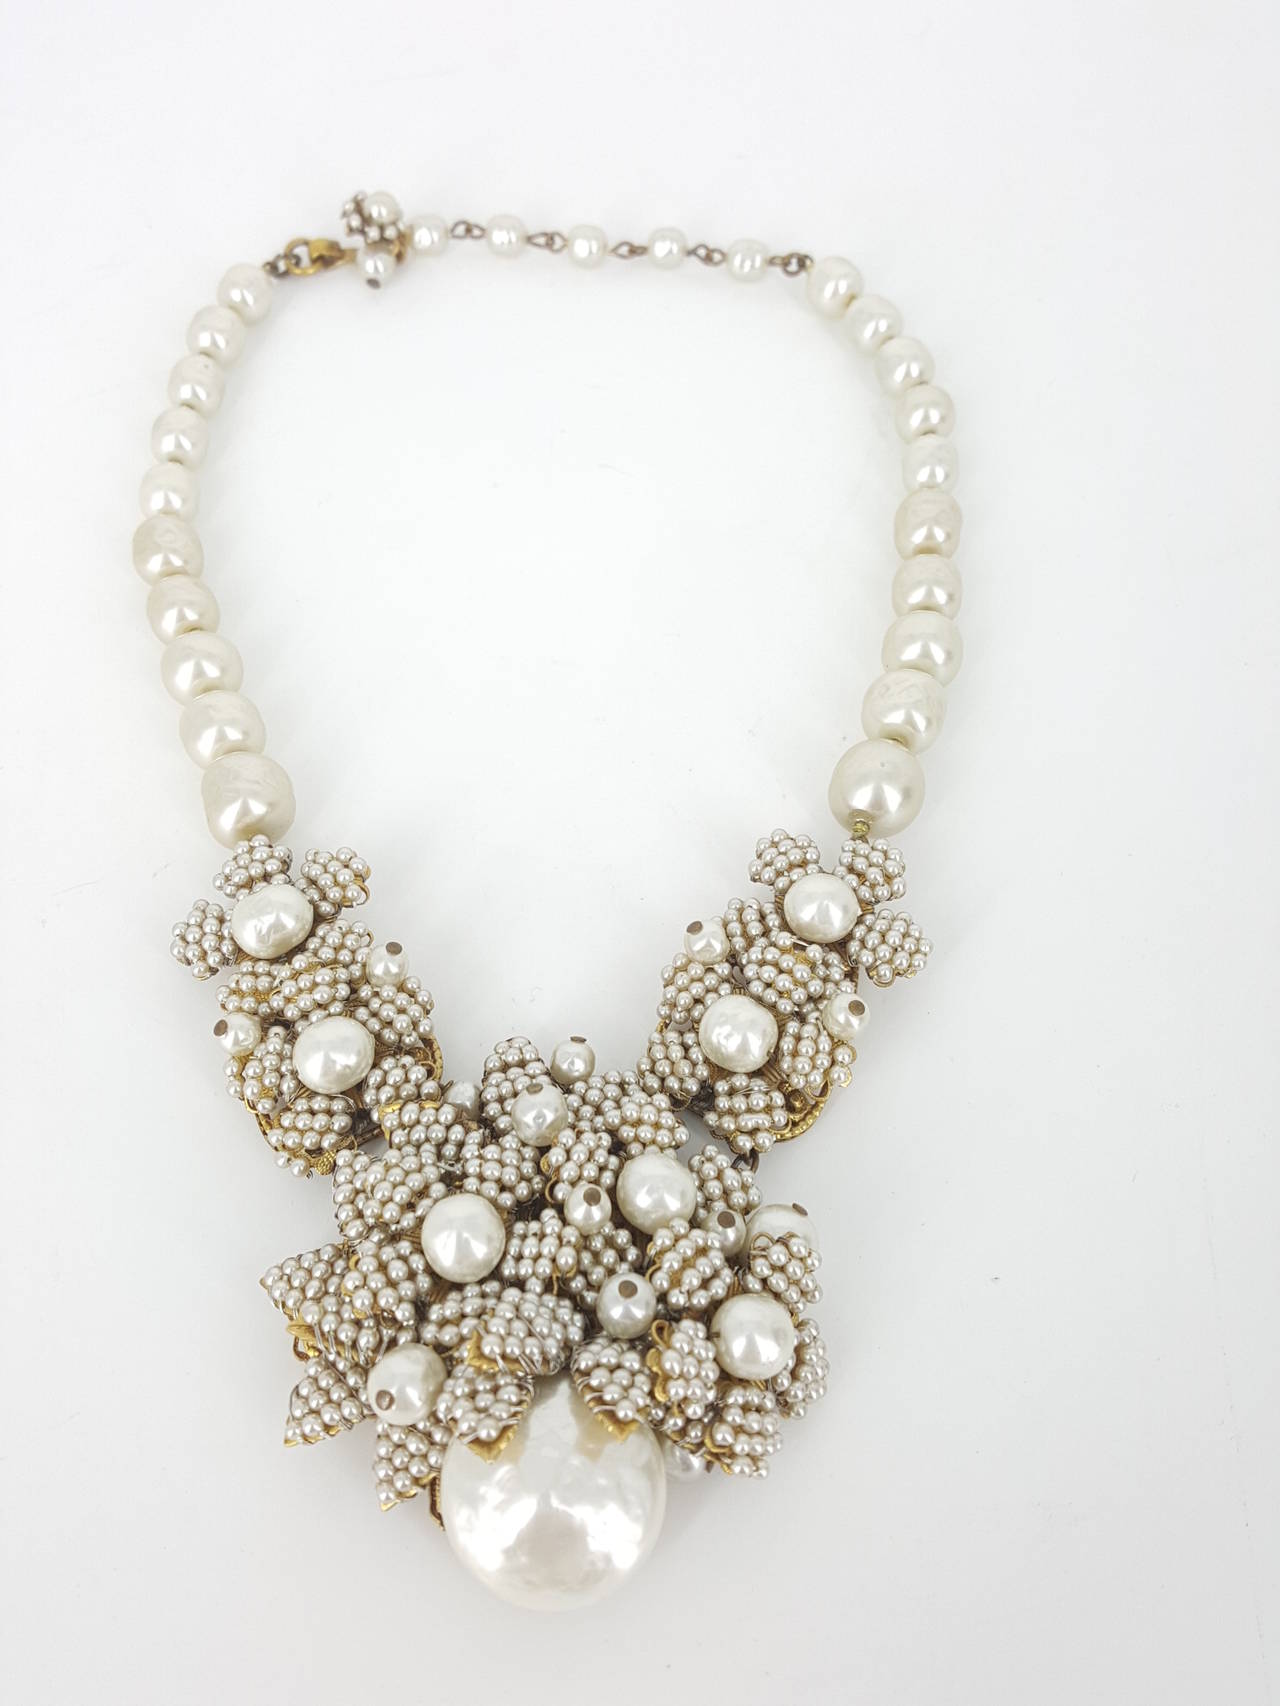 Offered for sale is this beautiful Miriam Haskell necklace in brass  tone, seed pearls, and baroque pearls.  Surely this is one of the finest examples of her work.  This piece is in excellent  condition and a 